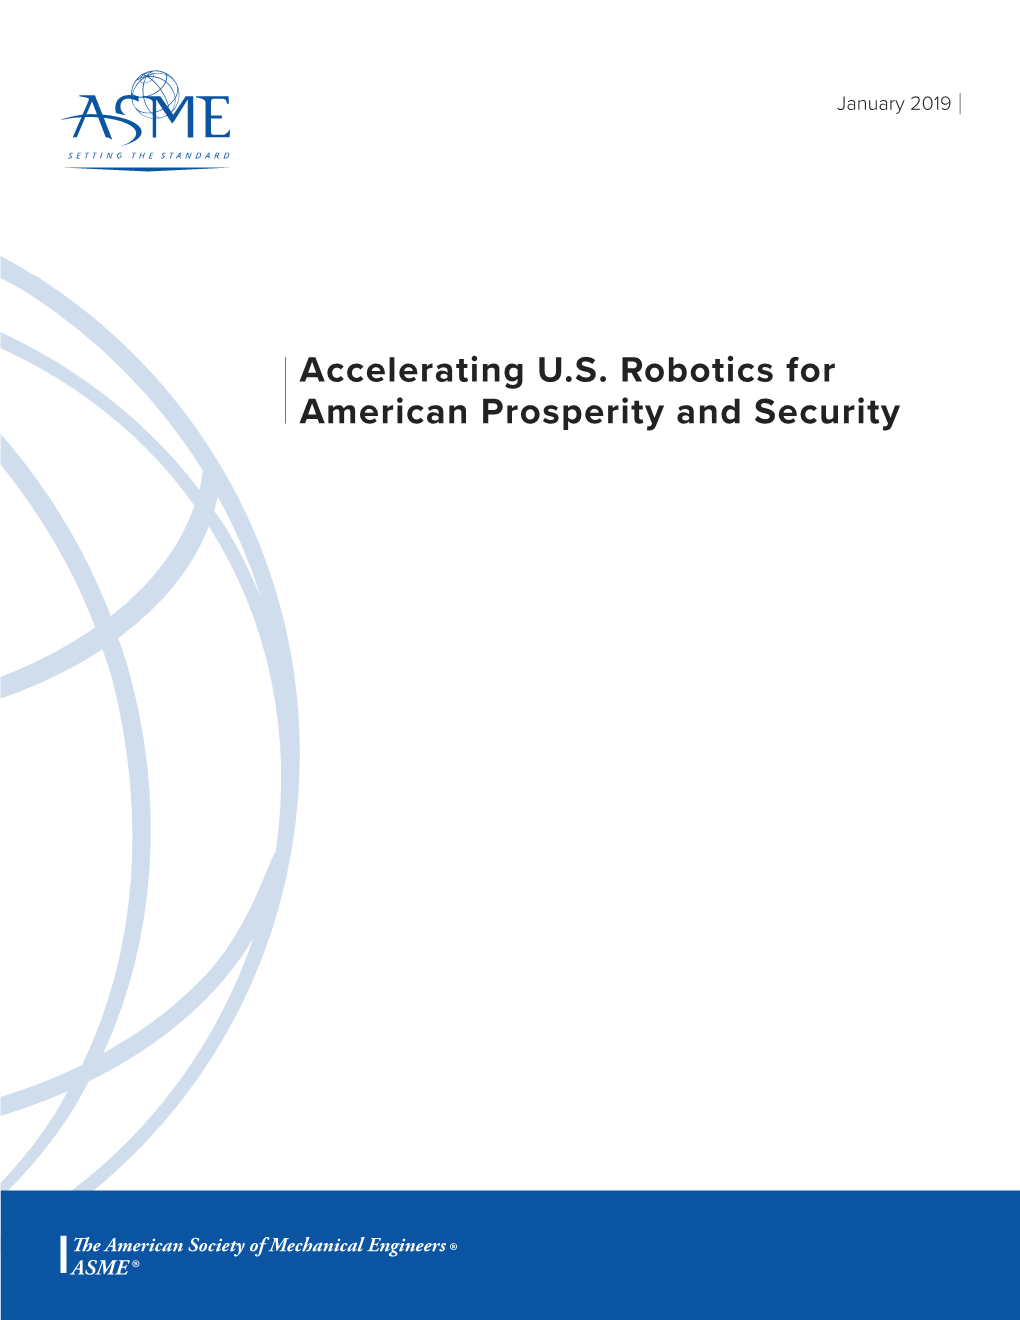 Accelerating U.S. Robotics for American Prosperity and Security